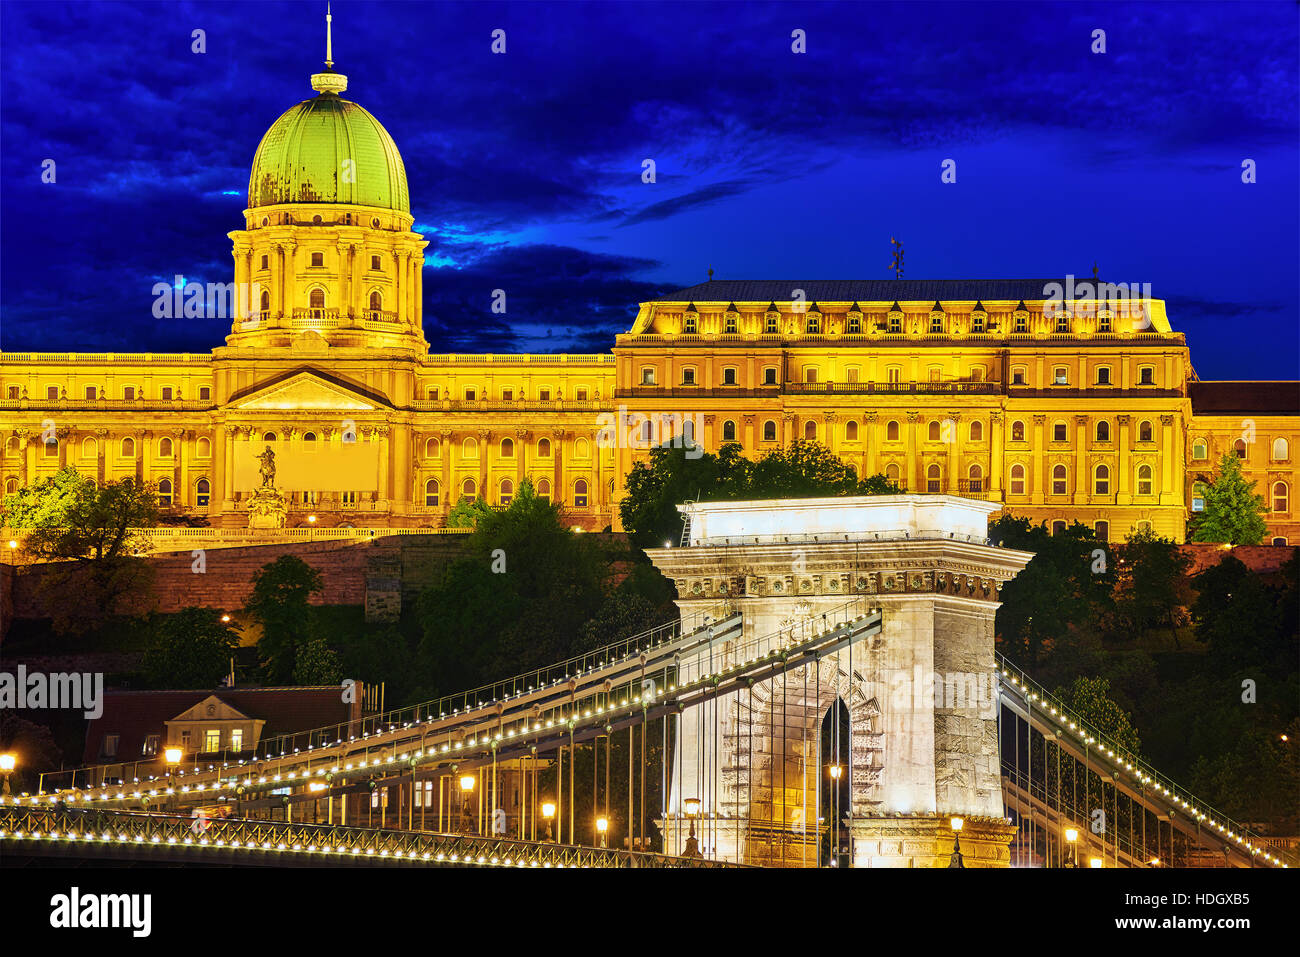 Budapest Royal Castle and Szechenyi Chain Bridge at dusk time from Danube river, Hungary. Stock Photo